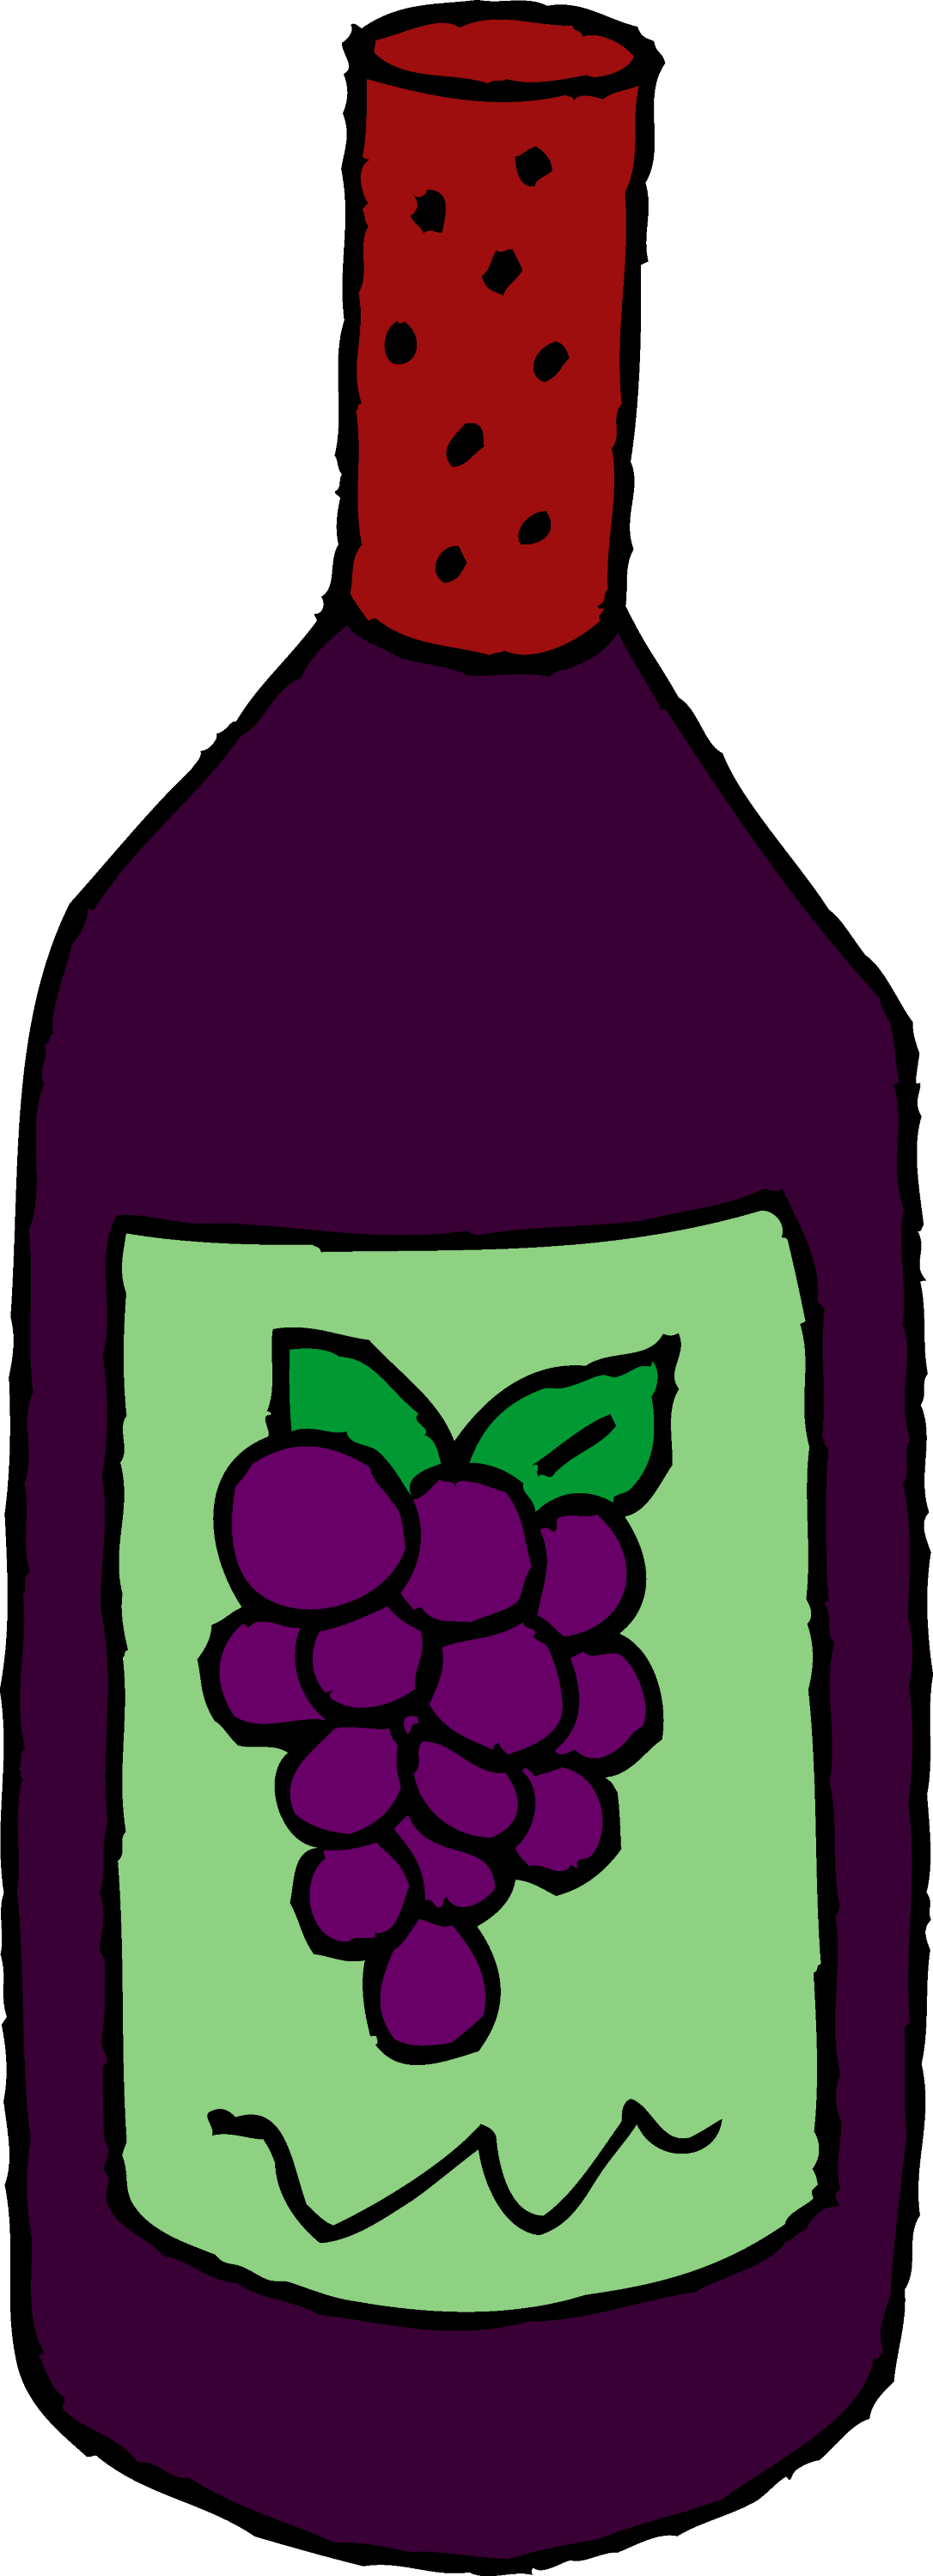 free clipart images wine - photo #27